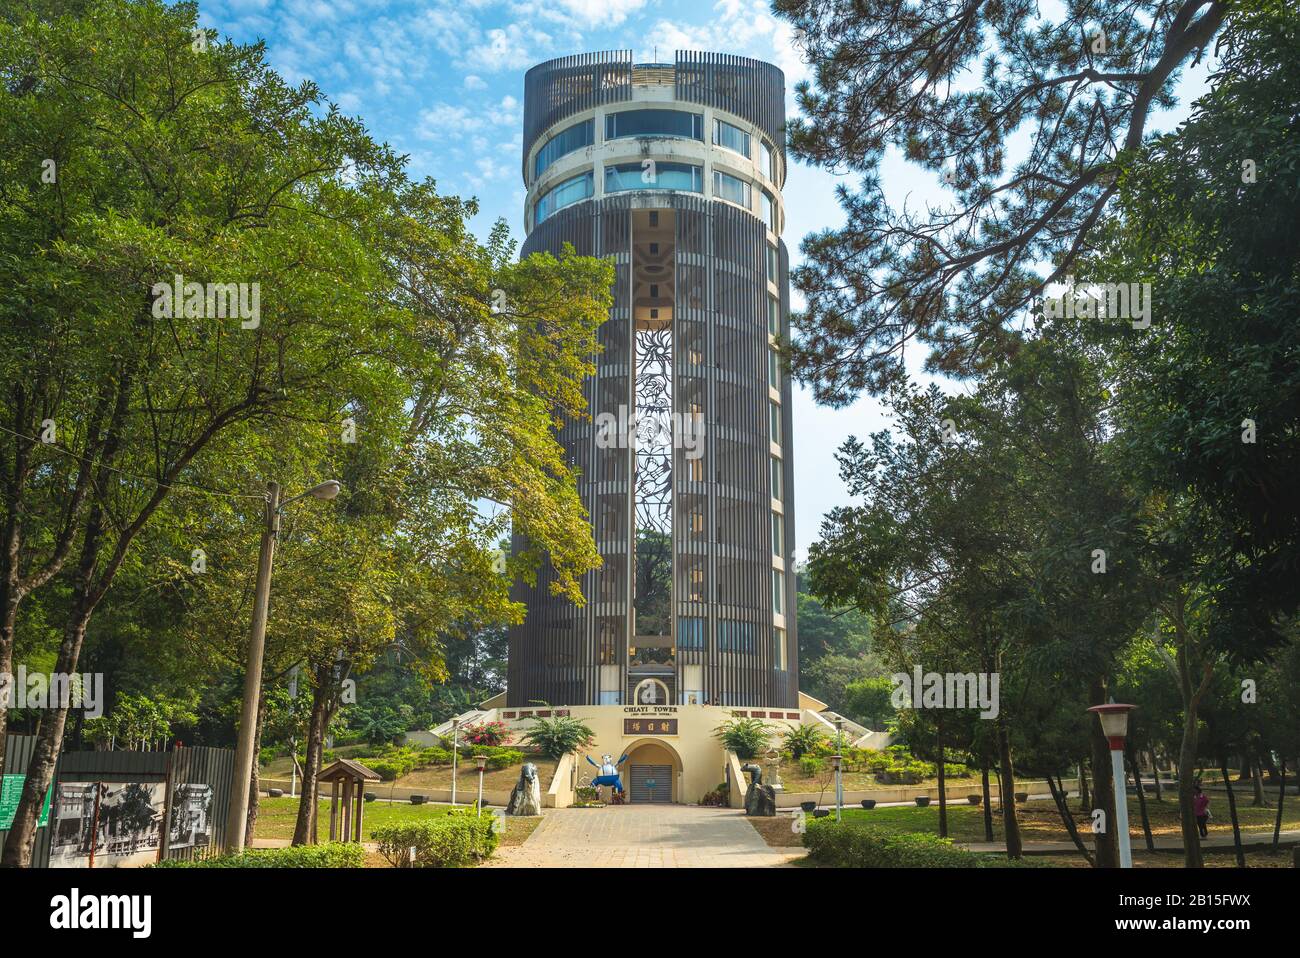 Chiayi, Taiwan - November 24, 2019: chiayi tower, also named sun shooting tower, one of the landmarks of chiayi city Stock Photo